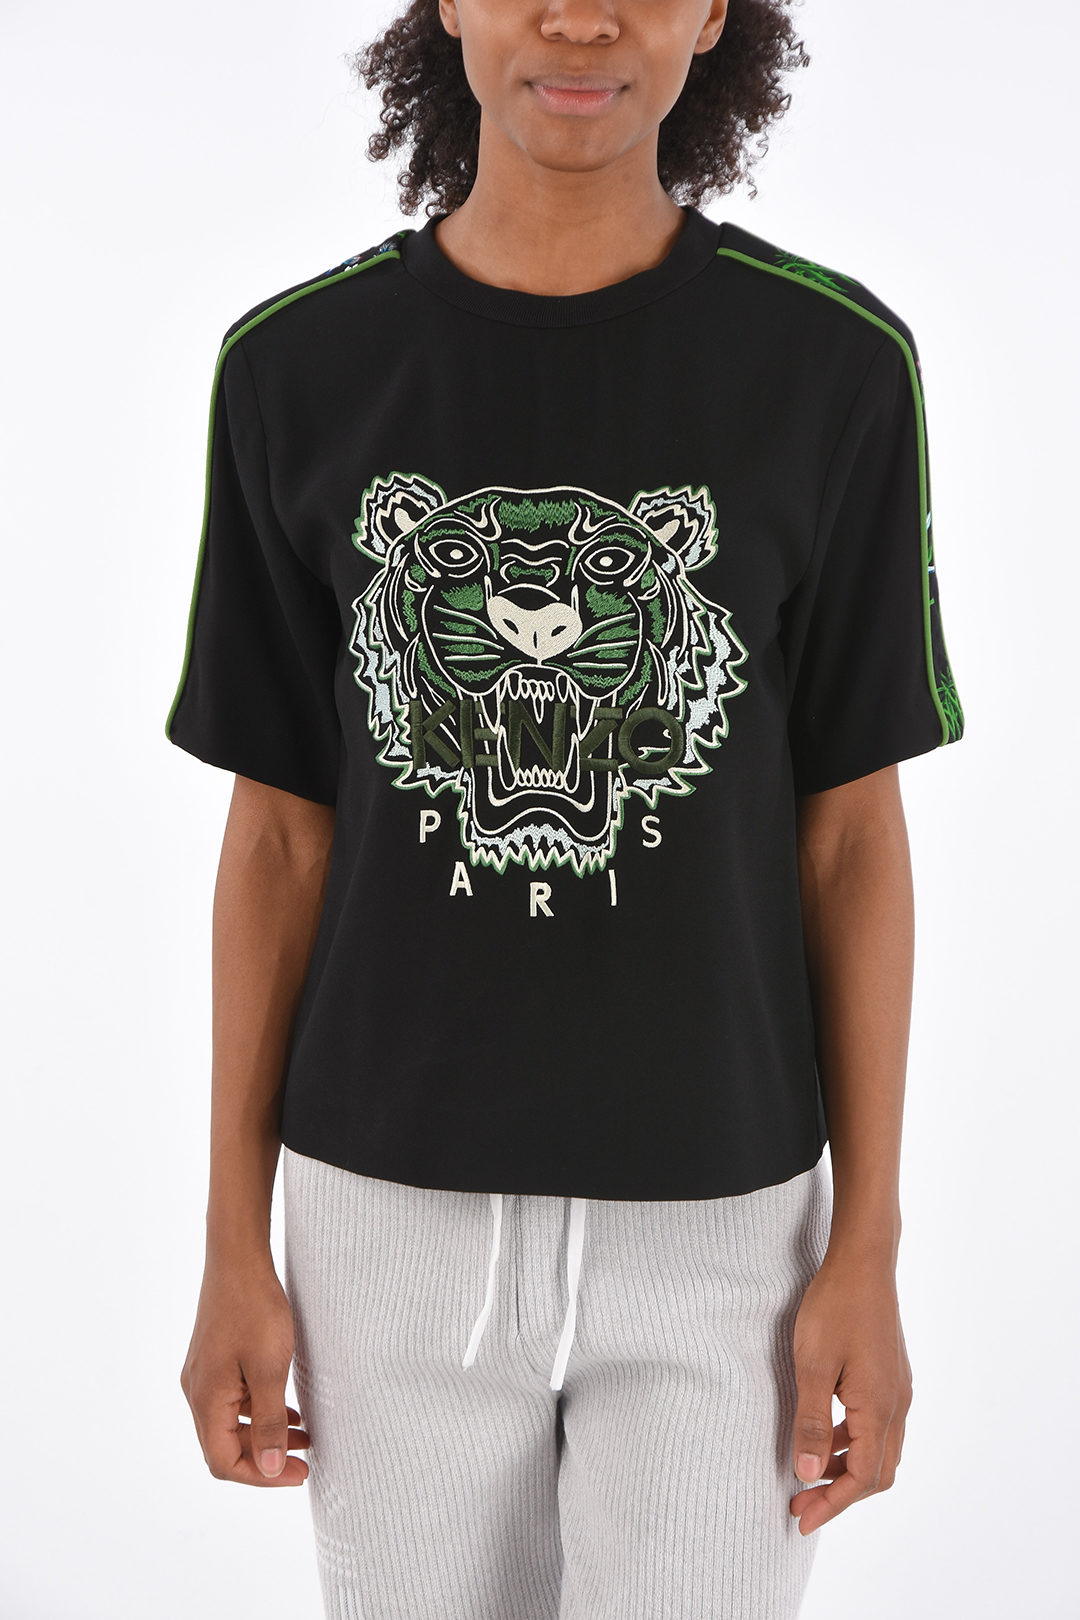 kenzo embroidered tiger t shirt